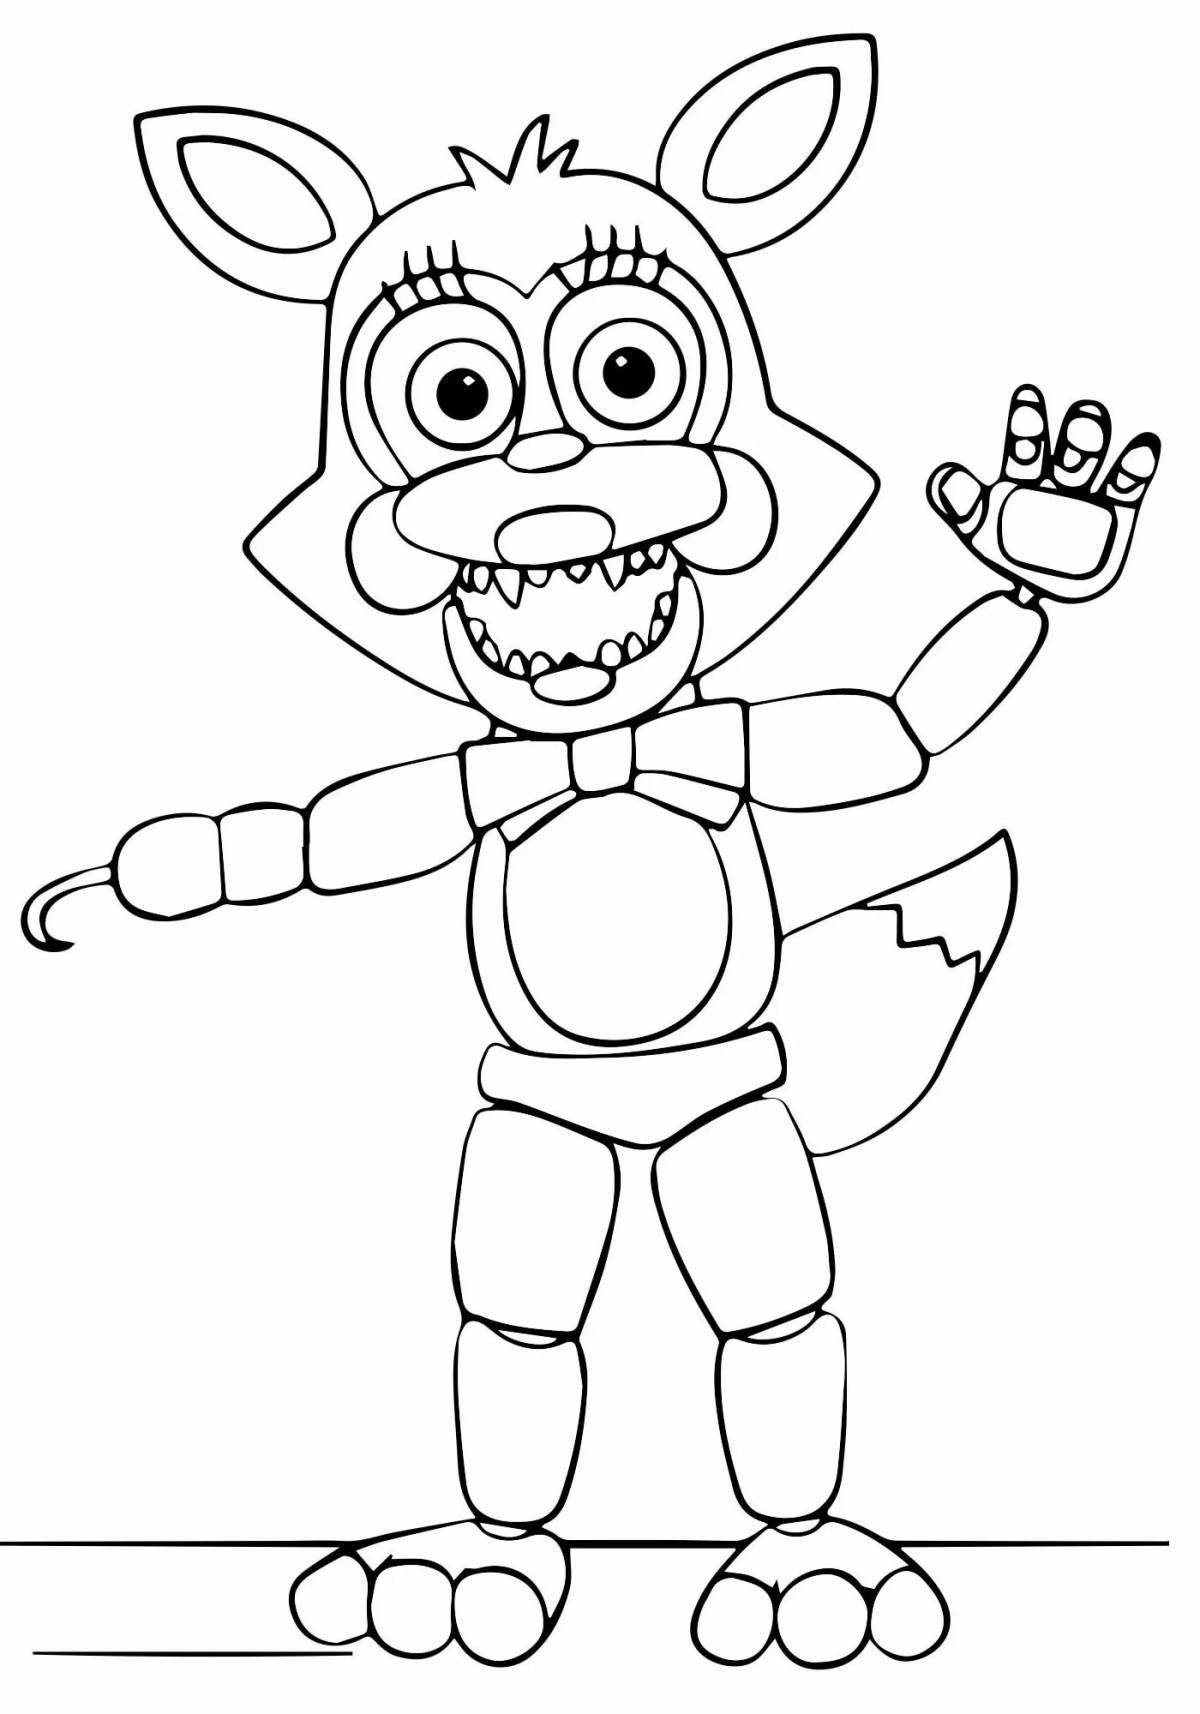 Charming official fnaf coloring page